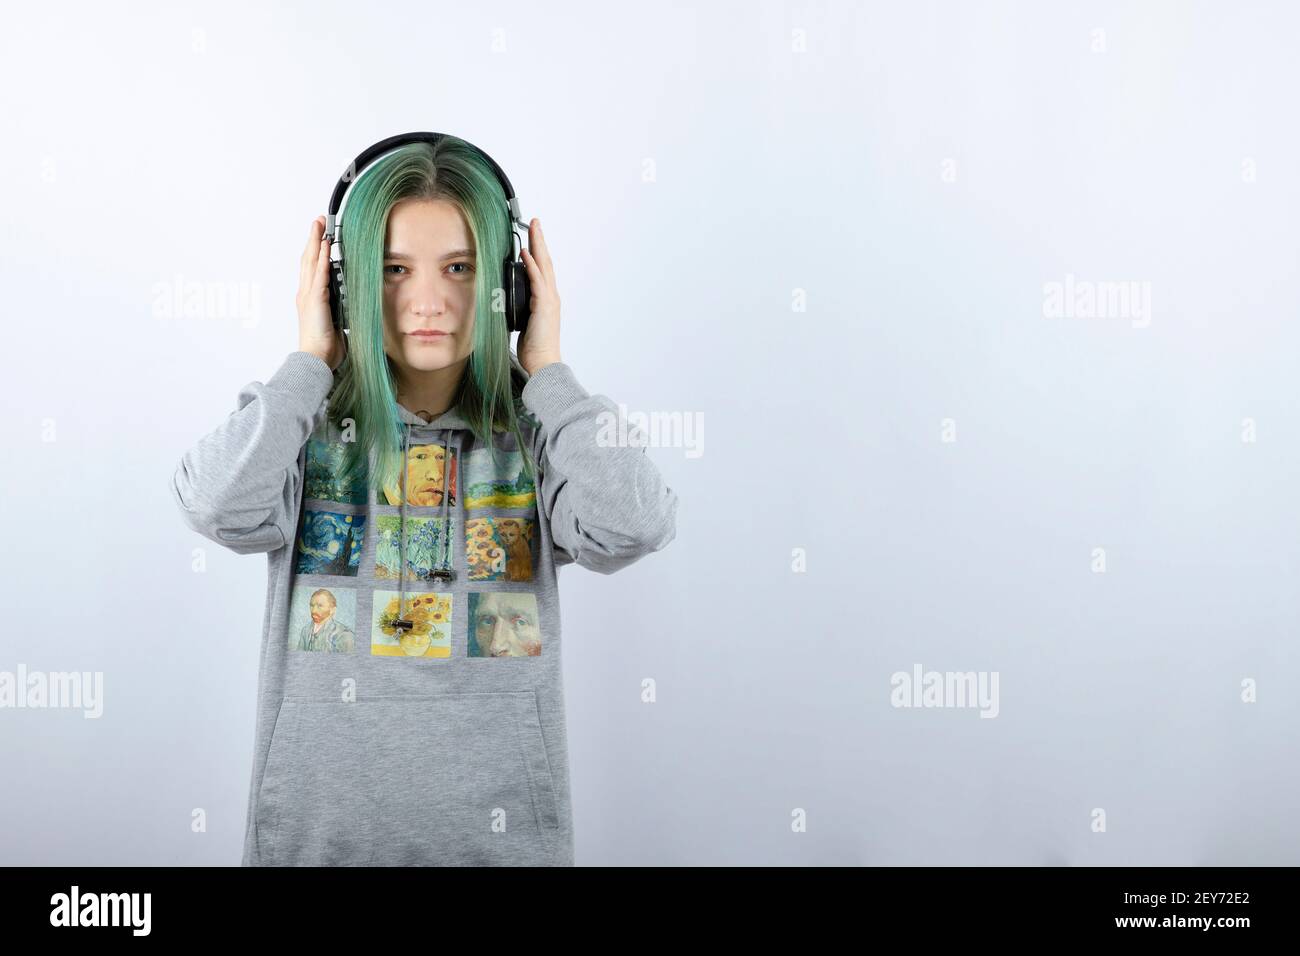 Photo of a young girl with green hair wearing headphones Stock Photo